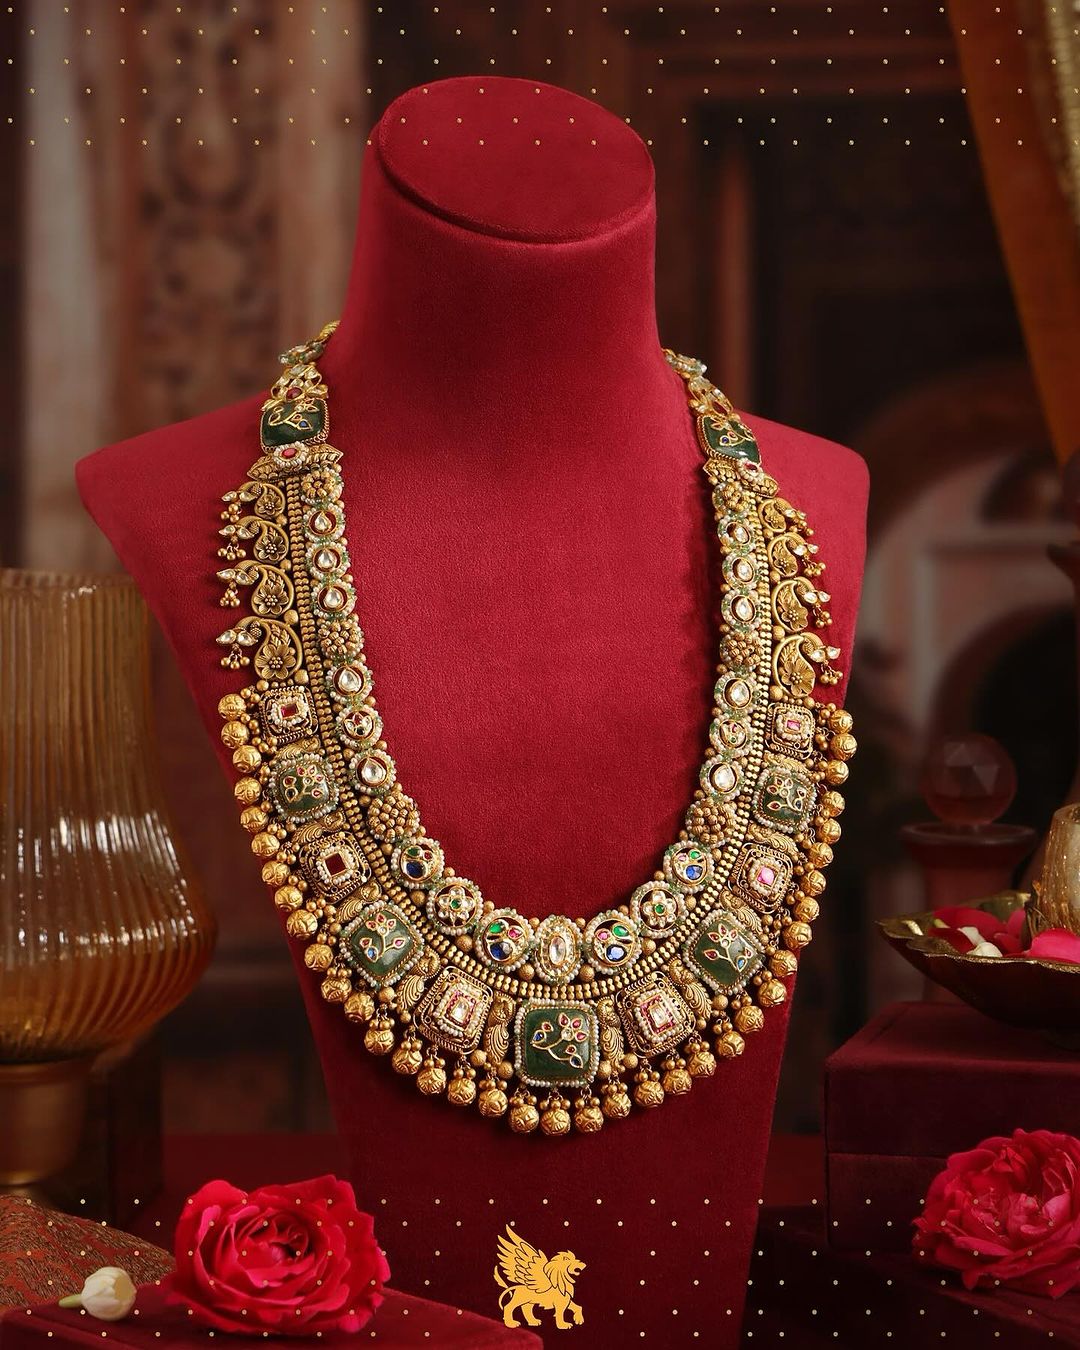 Exquisite Gold Long Necklace From 'Punjab Jewels'